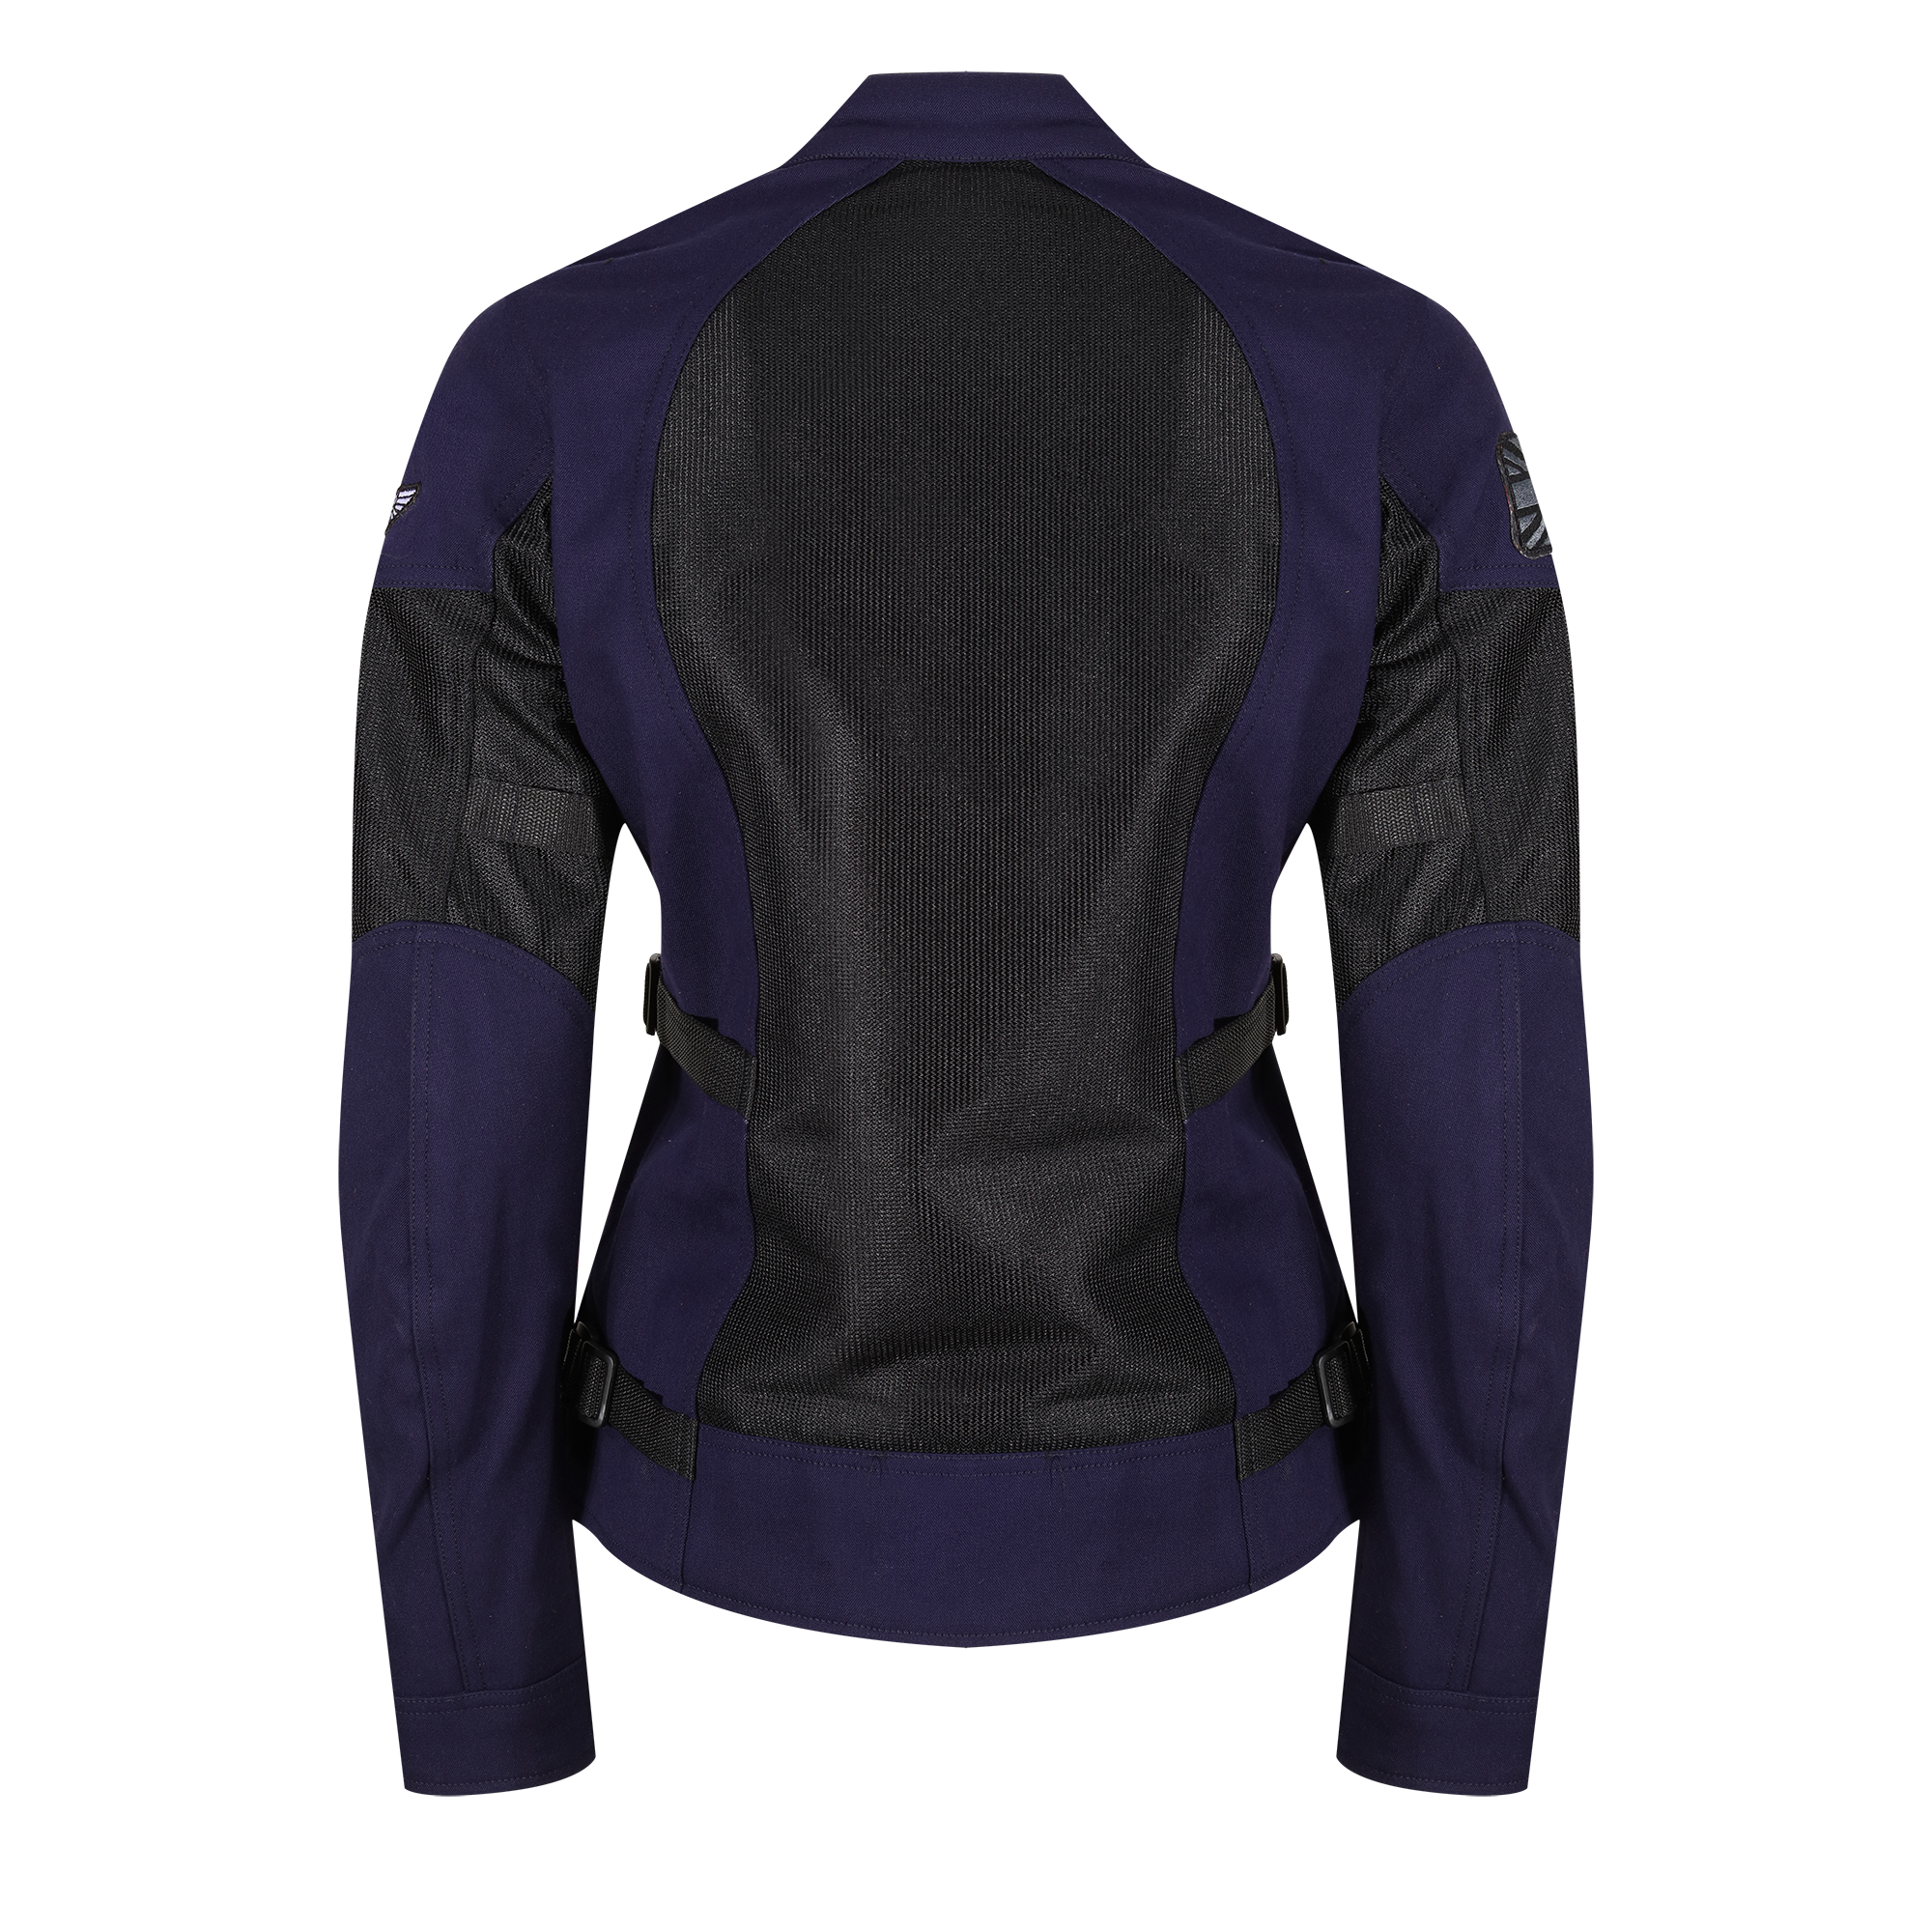 The back of  a blue and black women motorcycle mesh jacket from MotoGirl 